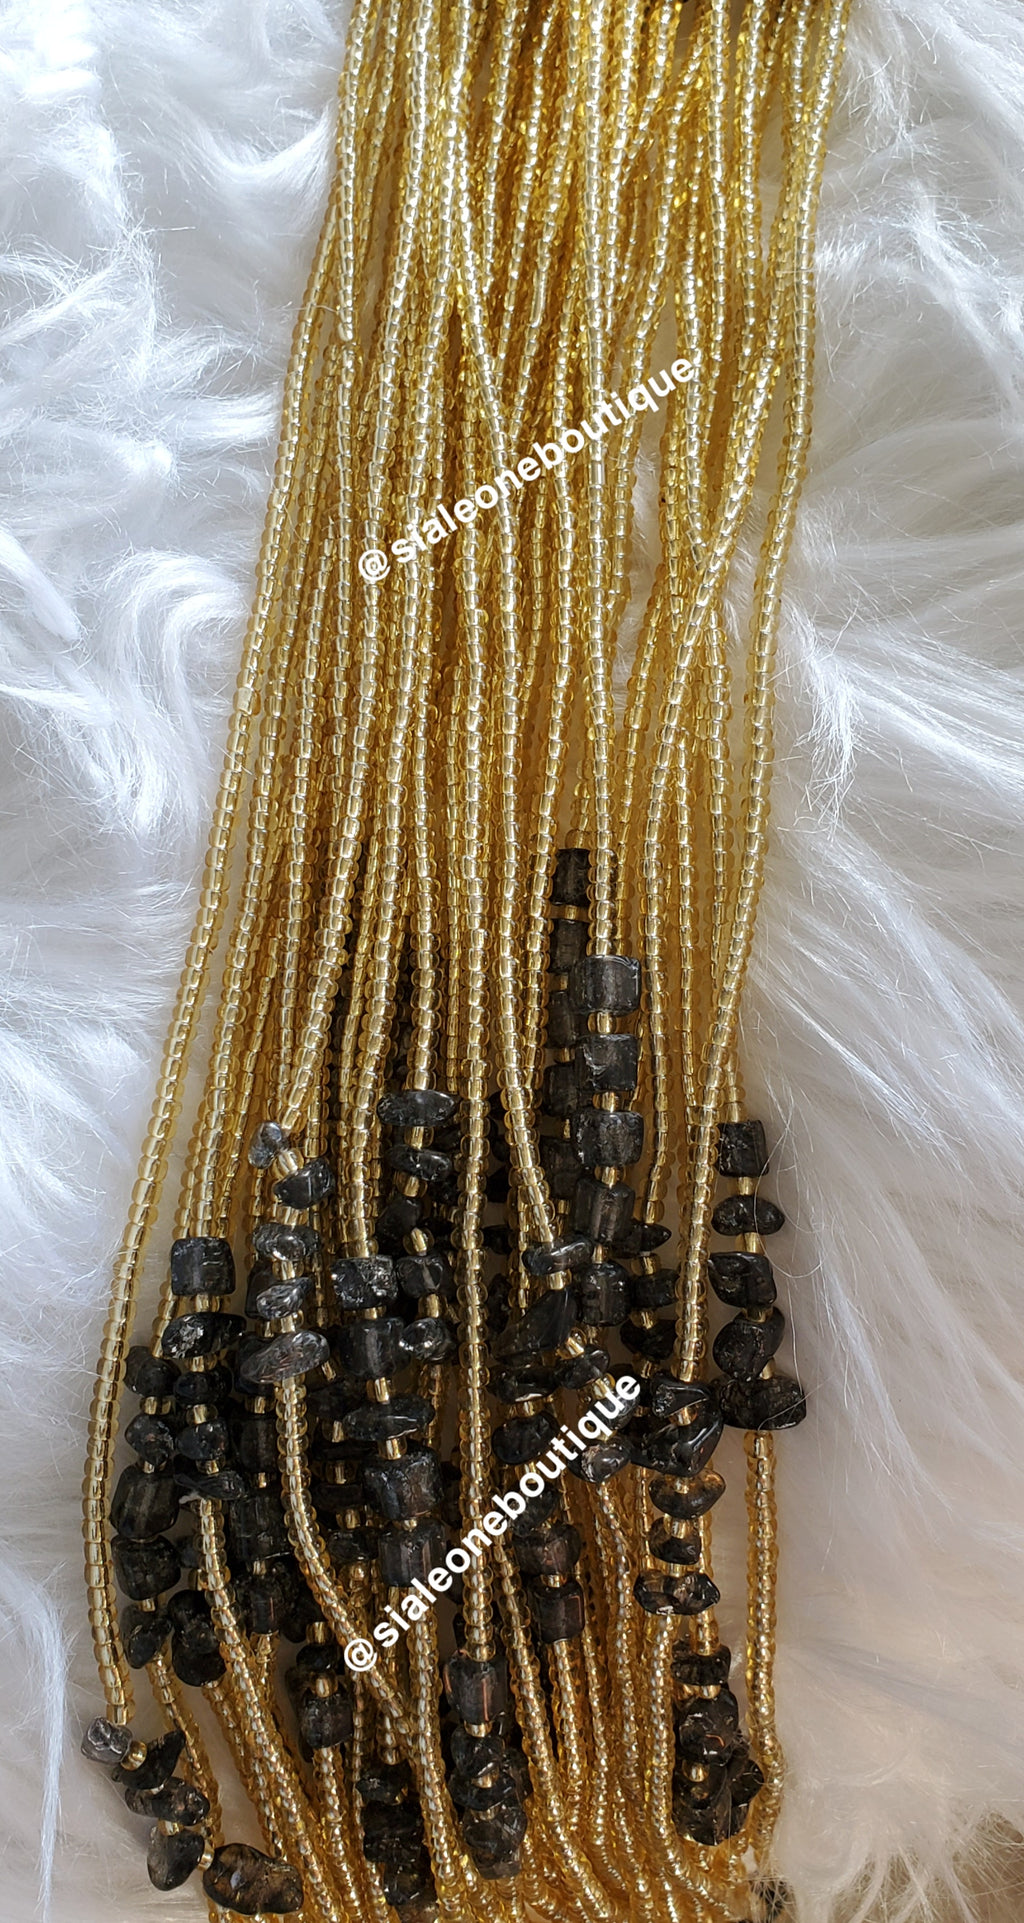 Gold Beads with Black Stones